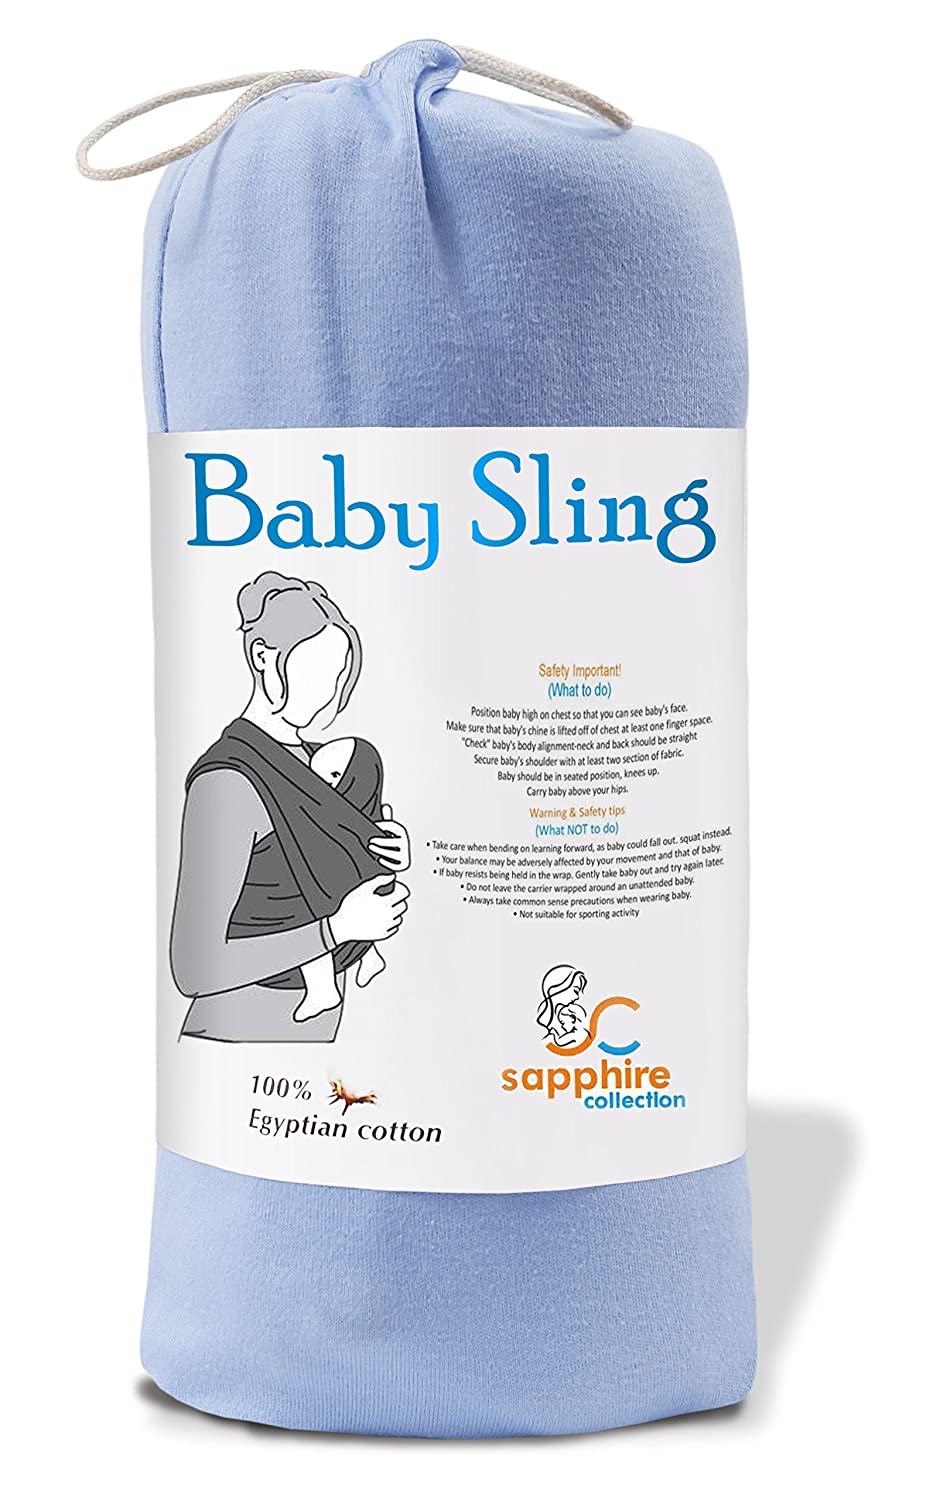 Sapphire Collection Baby Carrier Sling Stretchy Maternity Rage Cloth – Extra Soft and Light Weight, Quiet – Birth to 3 yrs sky blue